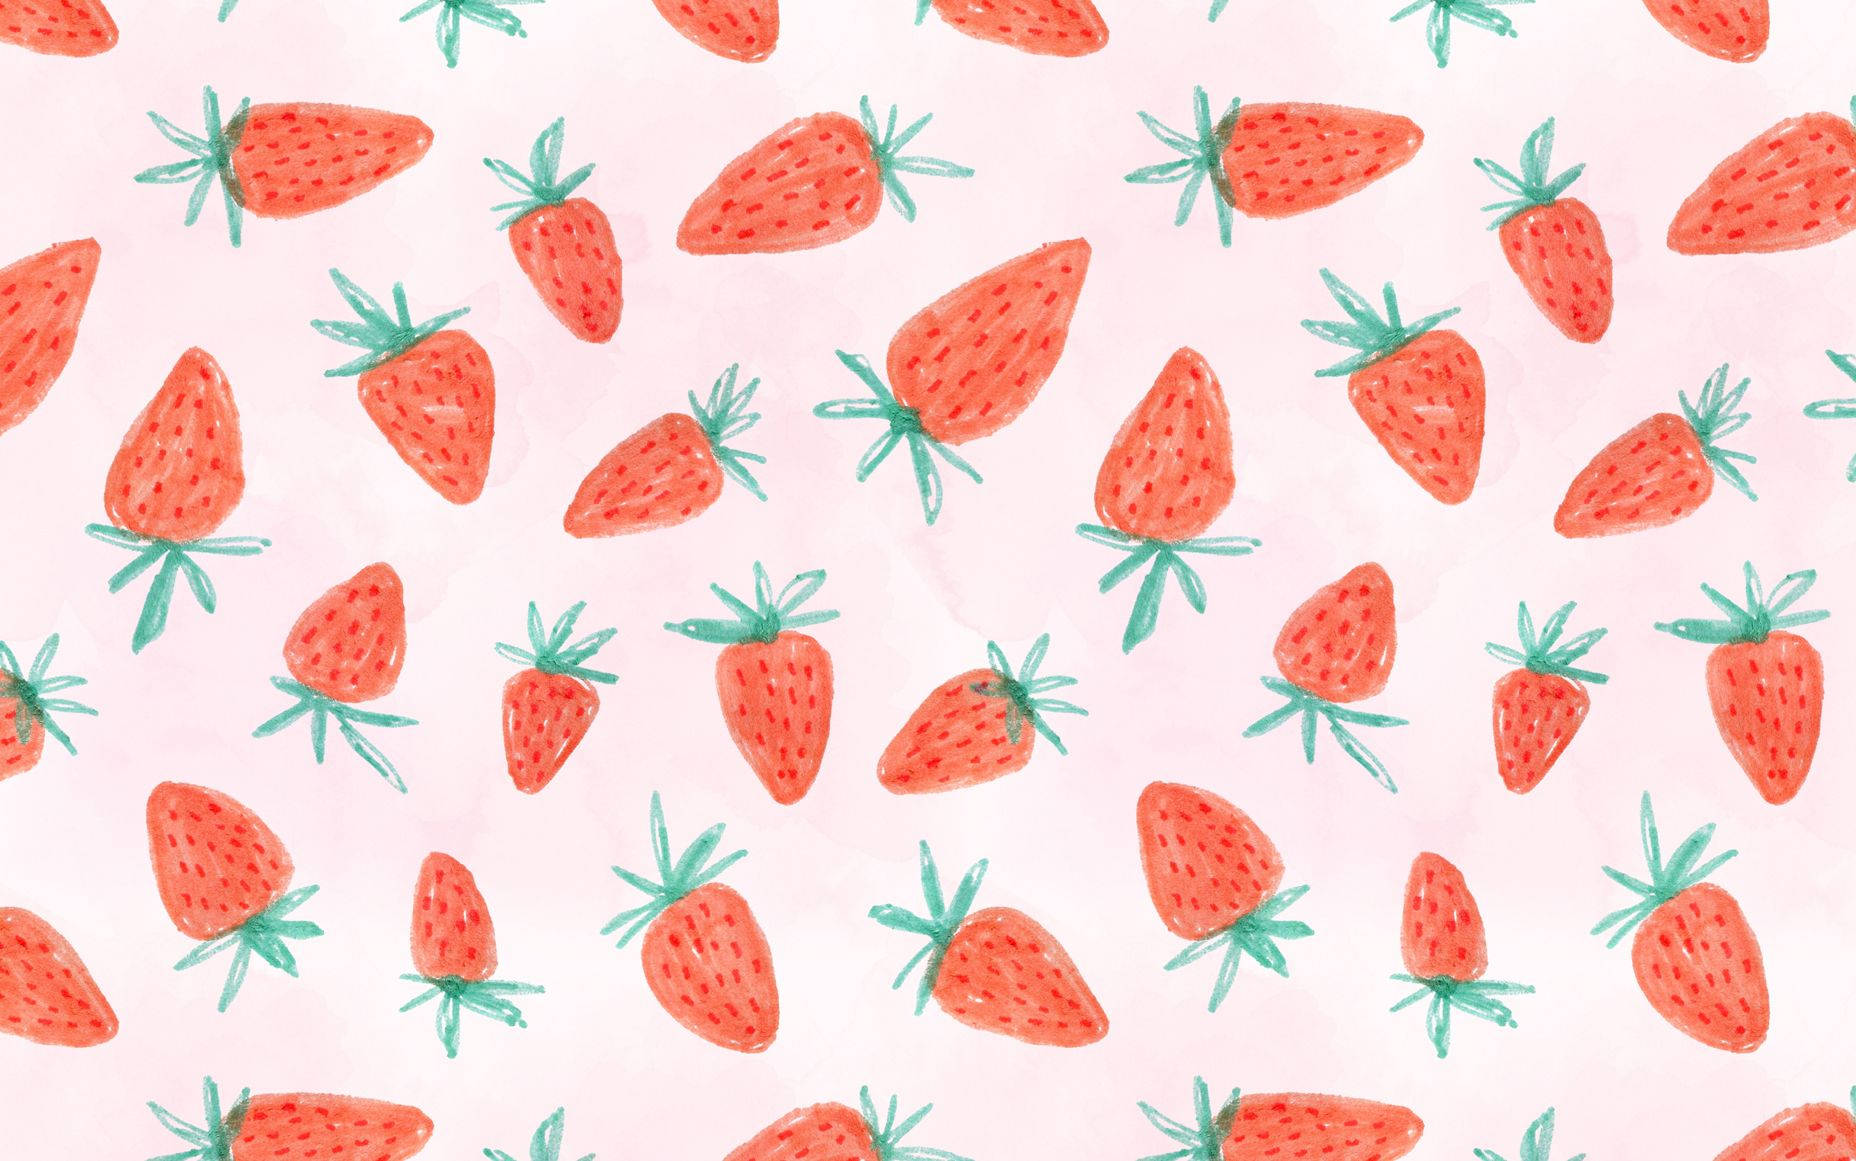 Enjoy the freshness of summer with this delicious strawberry aesthetic. Wallpaper